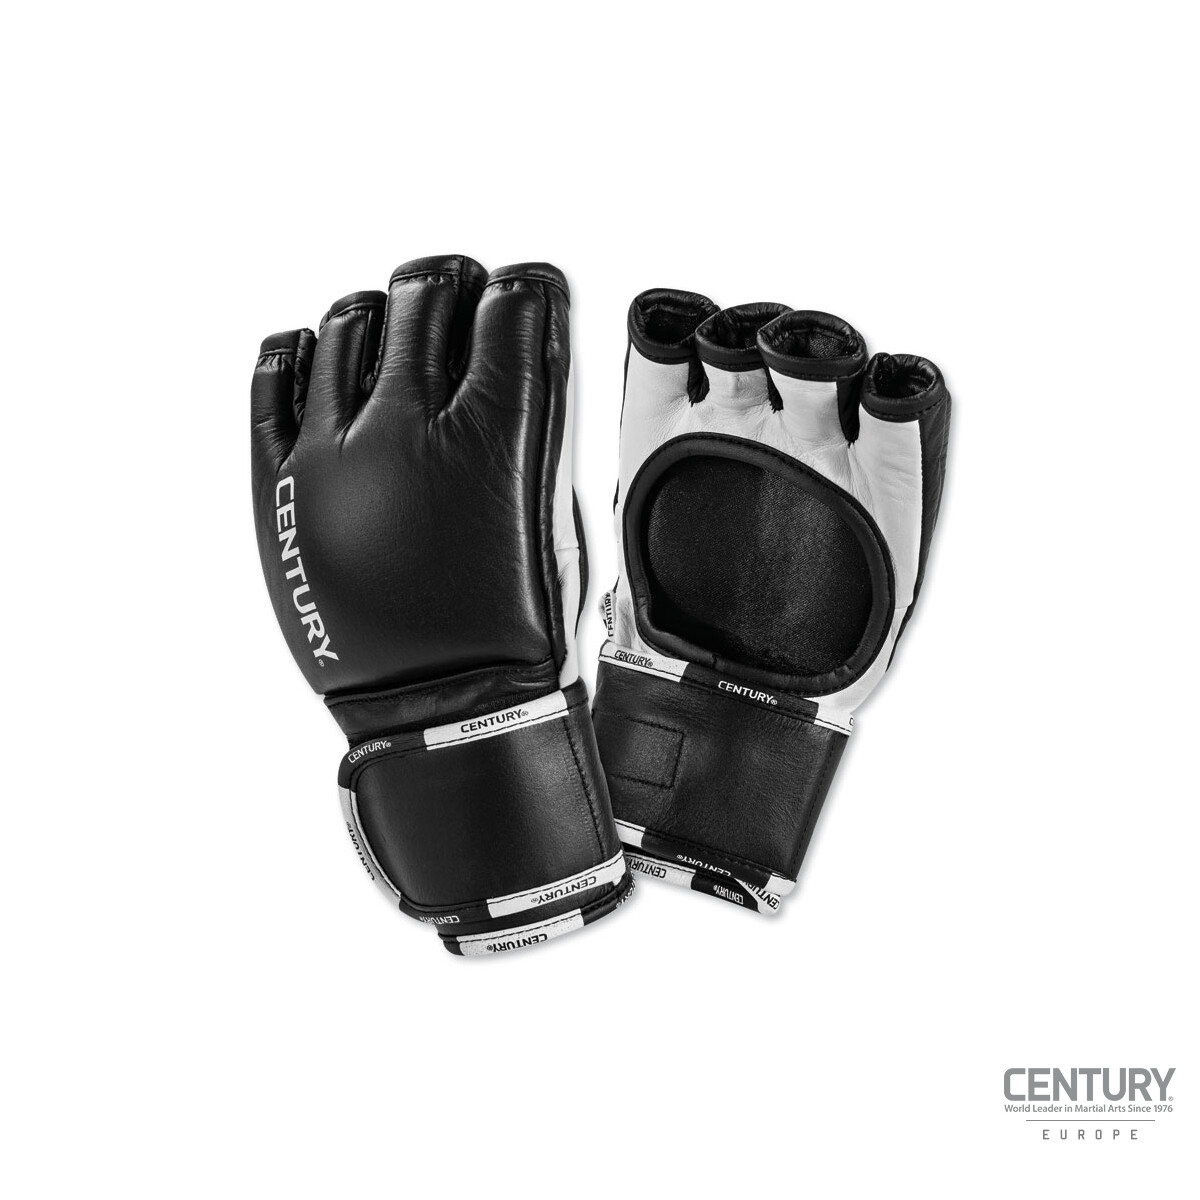 Century "Creed" MMA Competition Gloves S